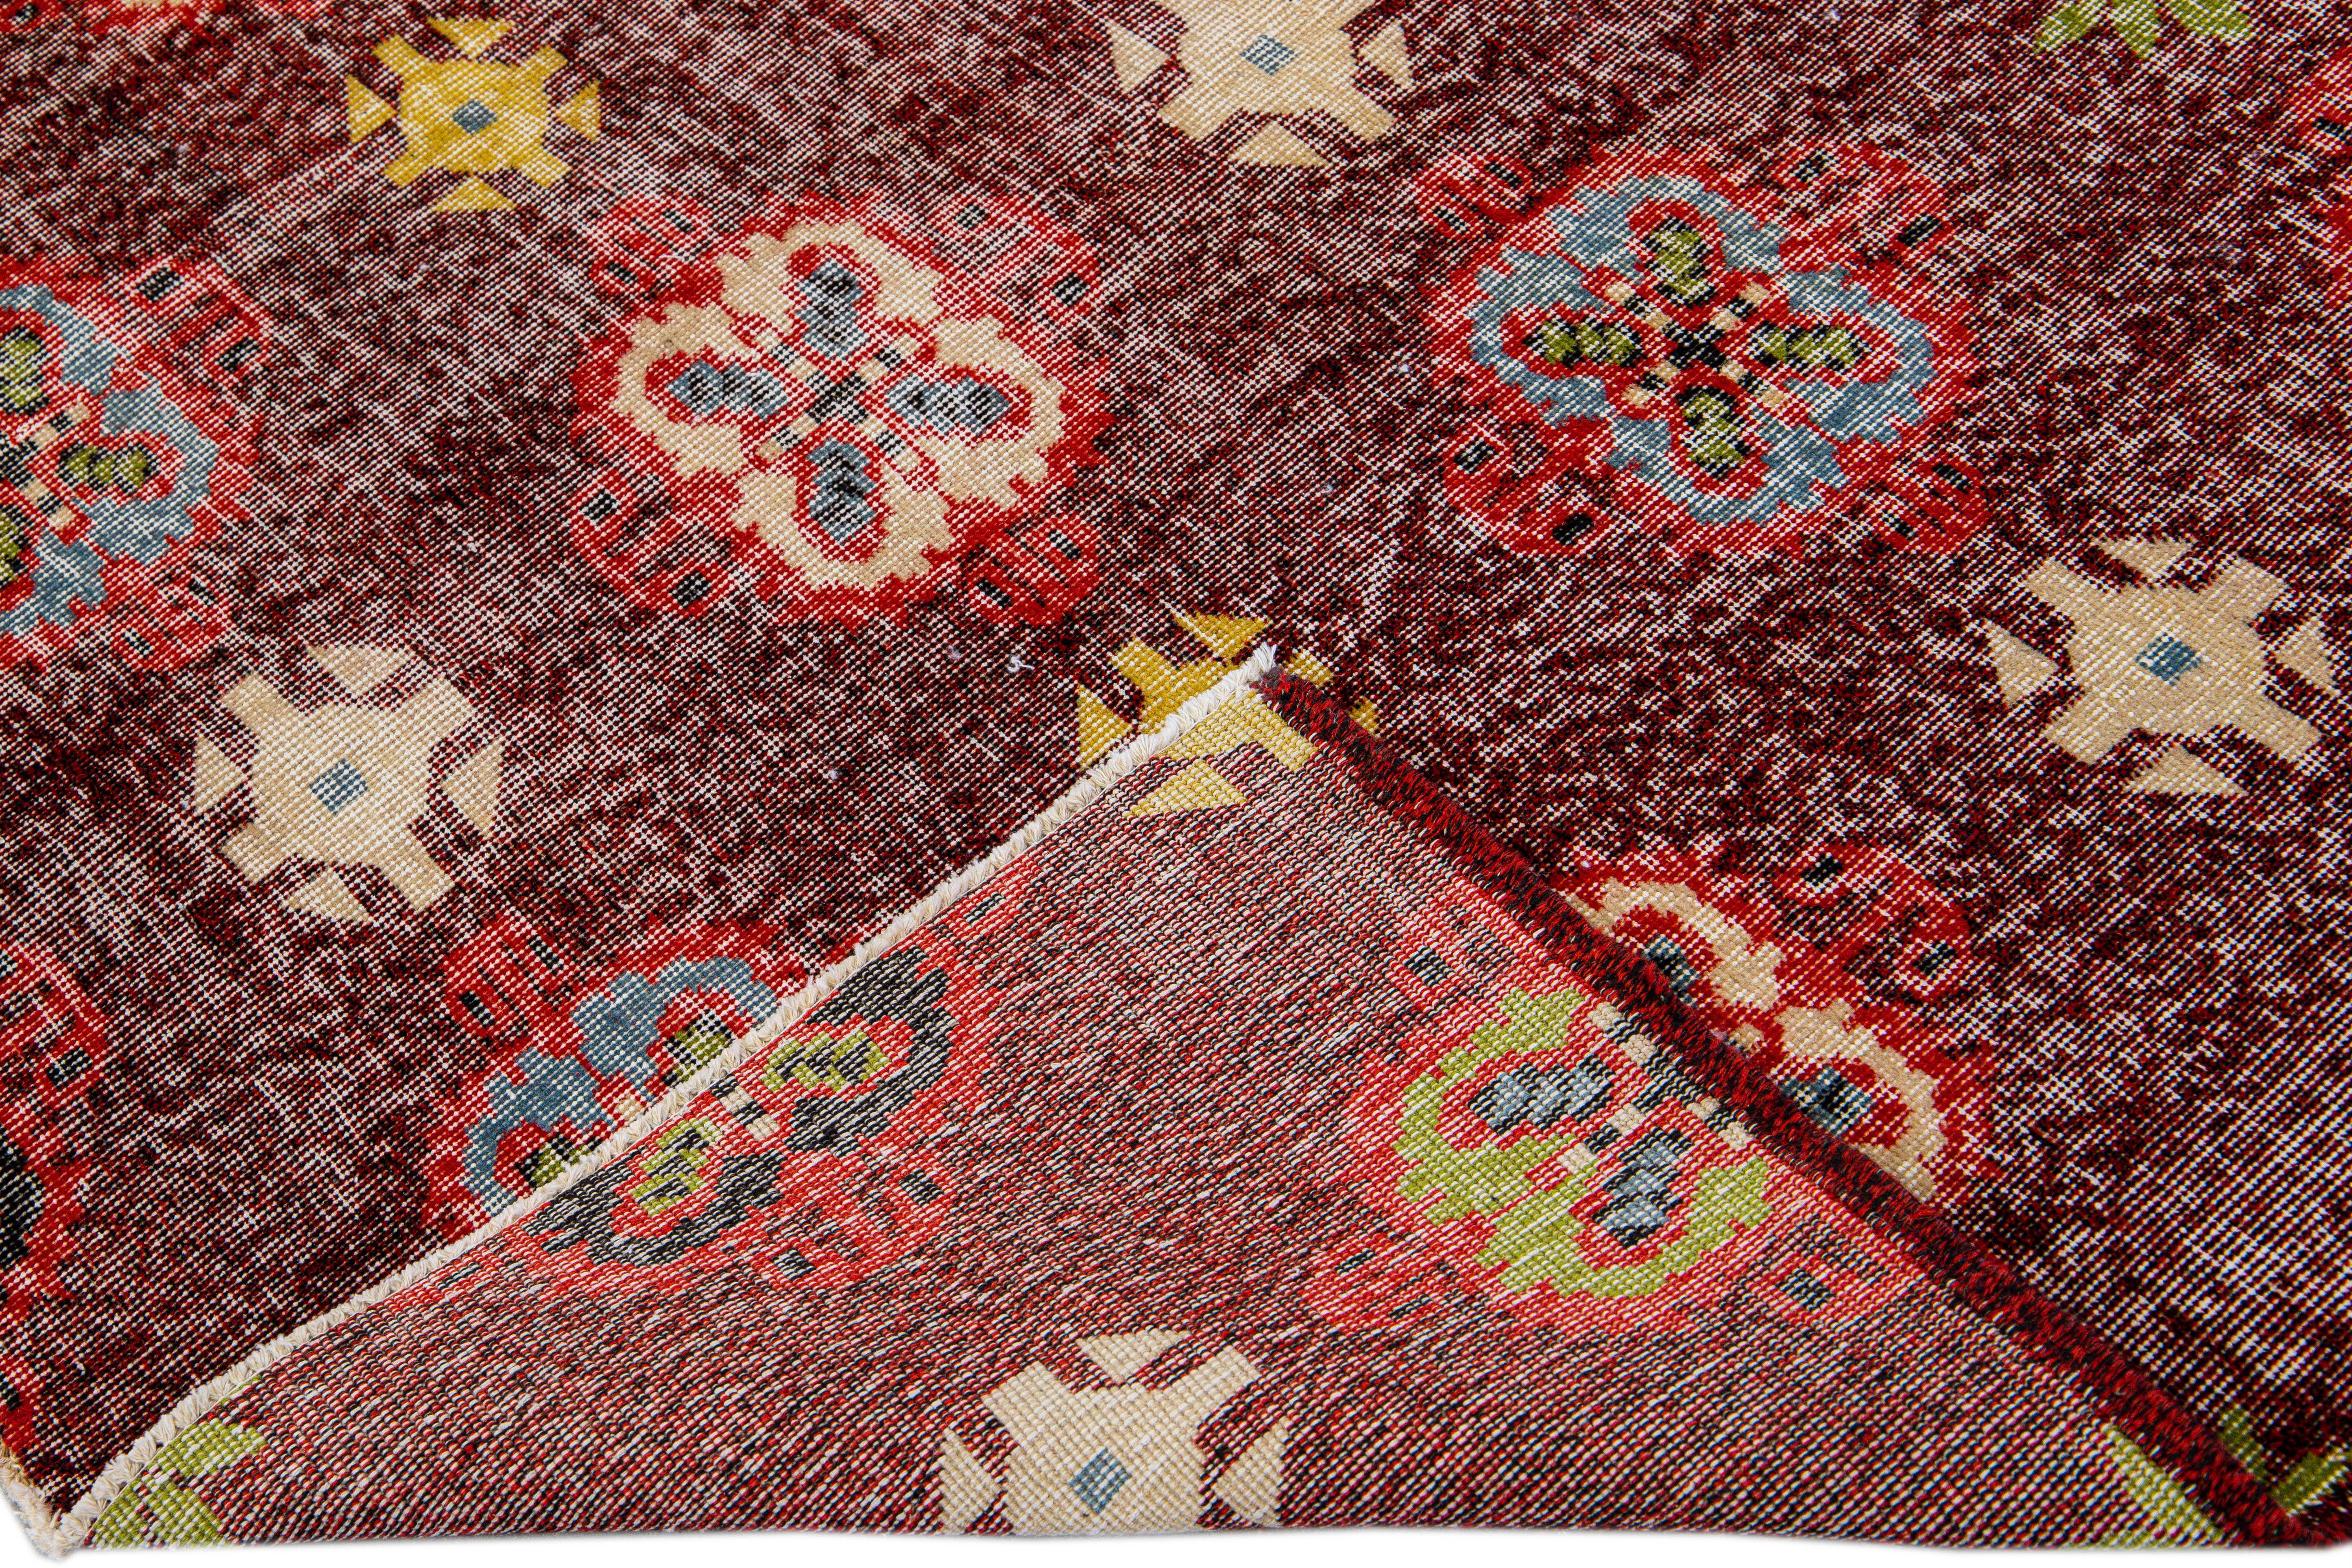 Beautiful vintage Deco Turkish hand-knotted wool rug with a burgundy field. This Turkish rug has red, blue, yellow, and beige accents in a gorgeous all-over floral pattern design.

This rug measures: 5'7